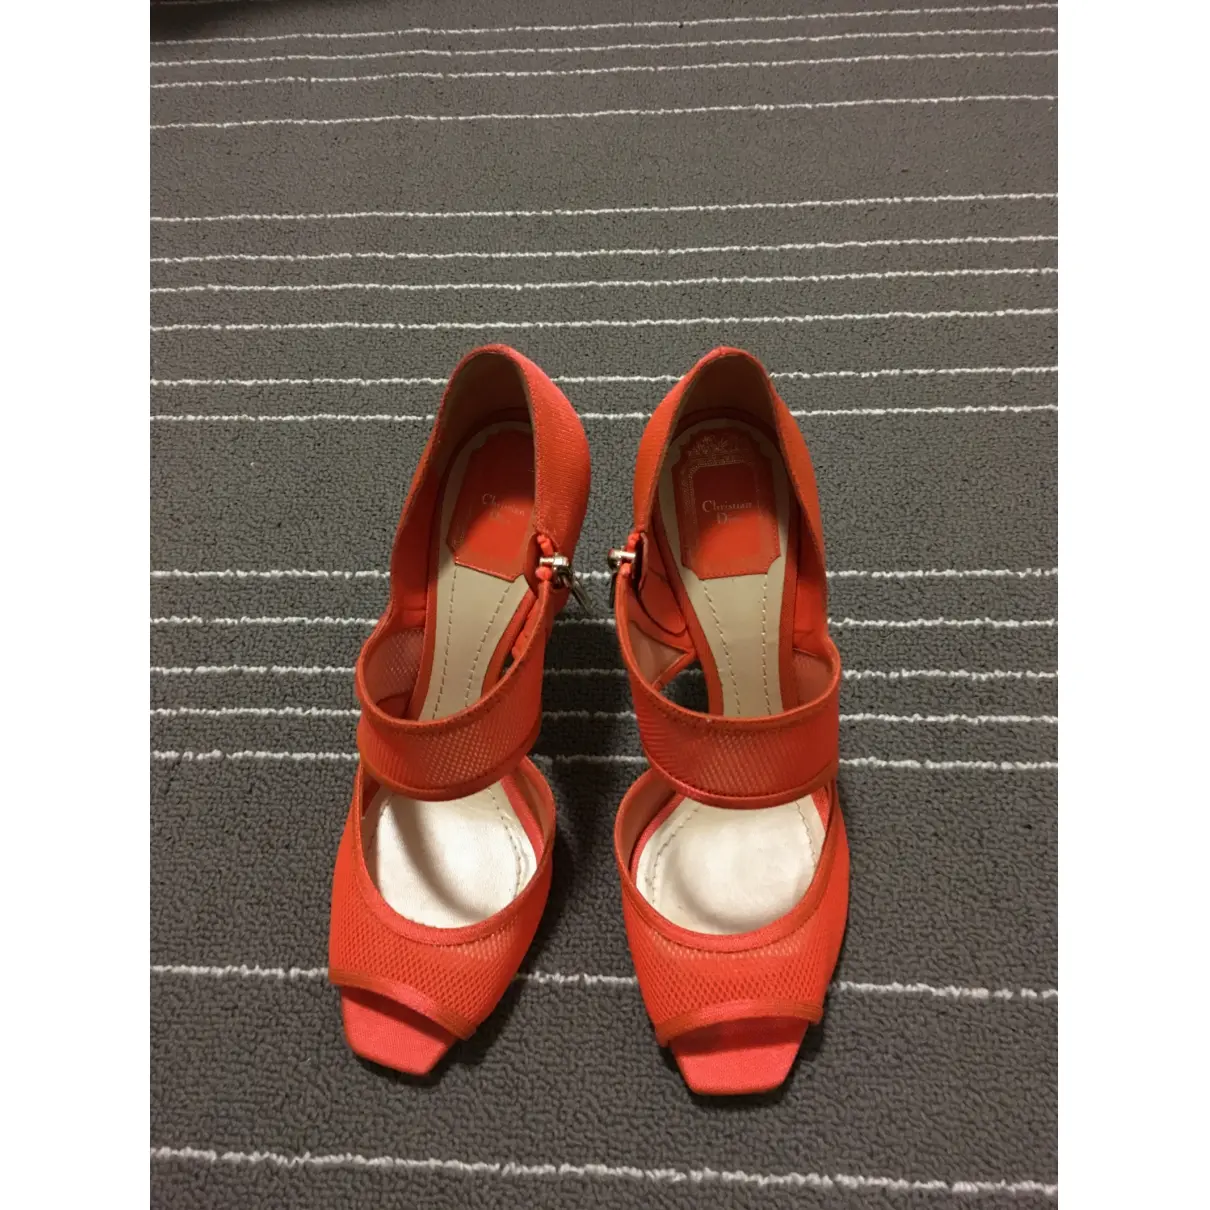 Dior Cloth heels for sale